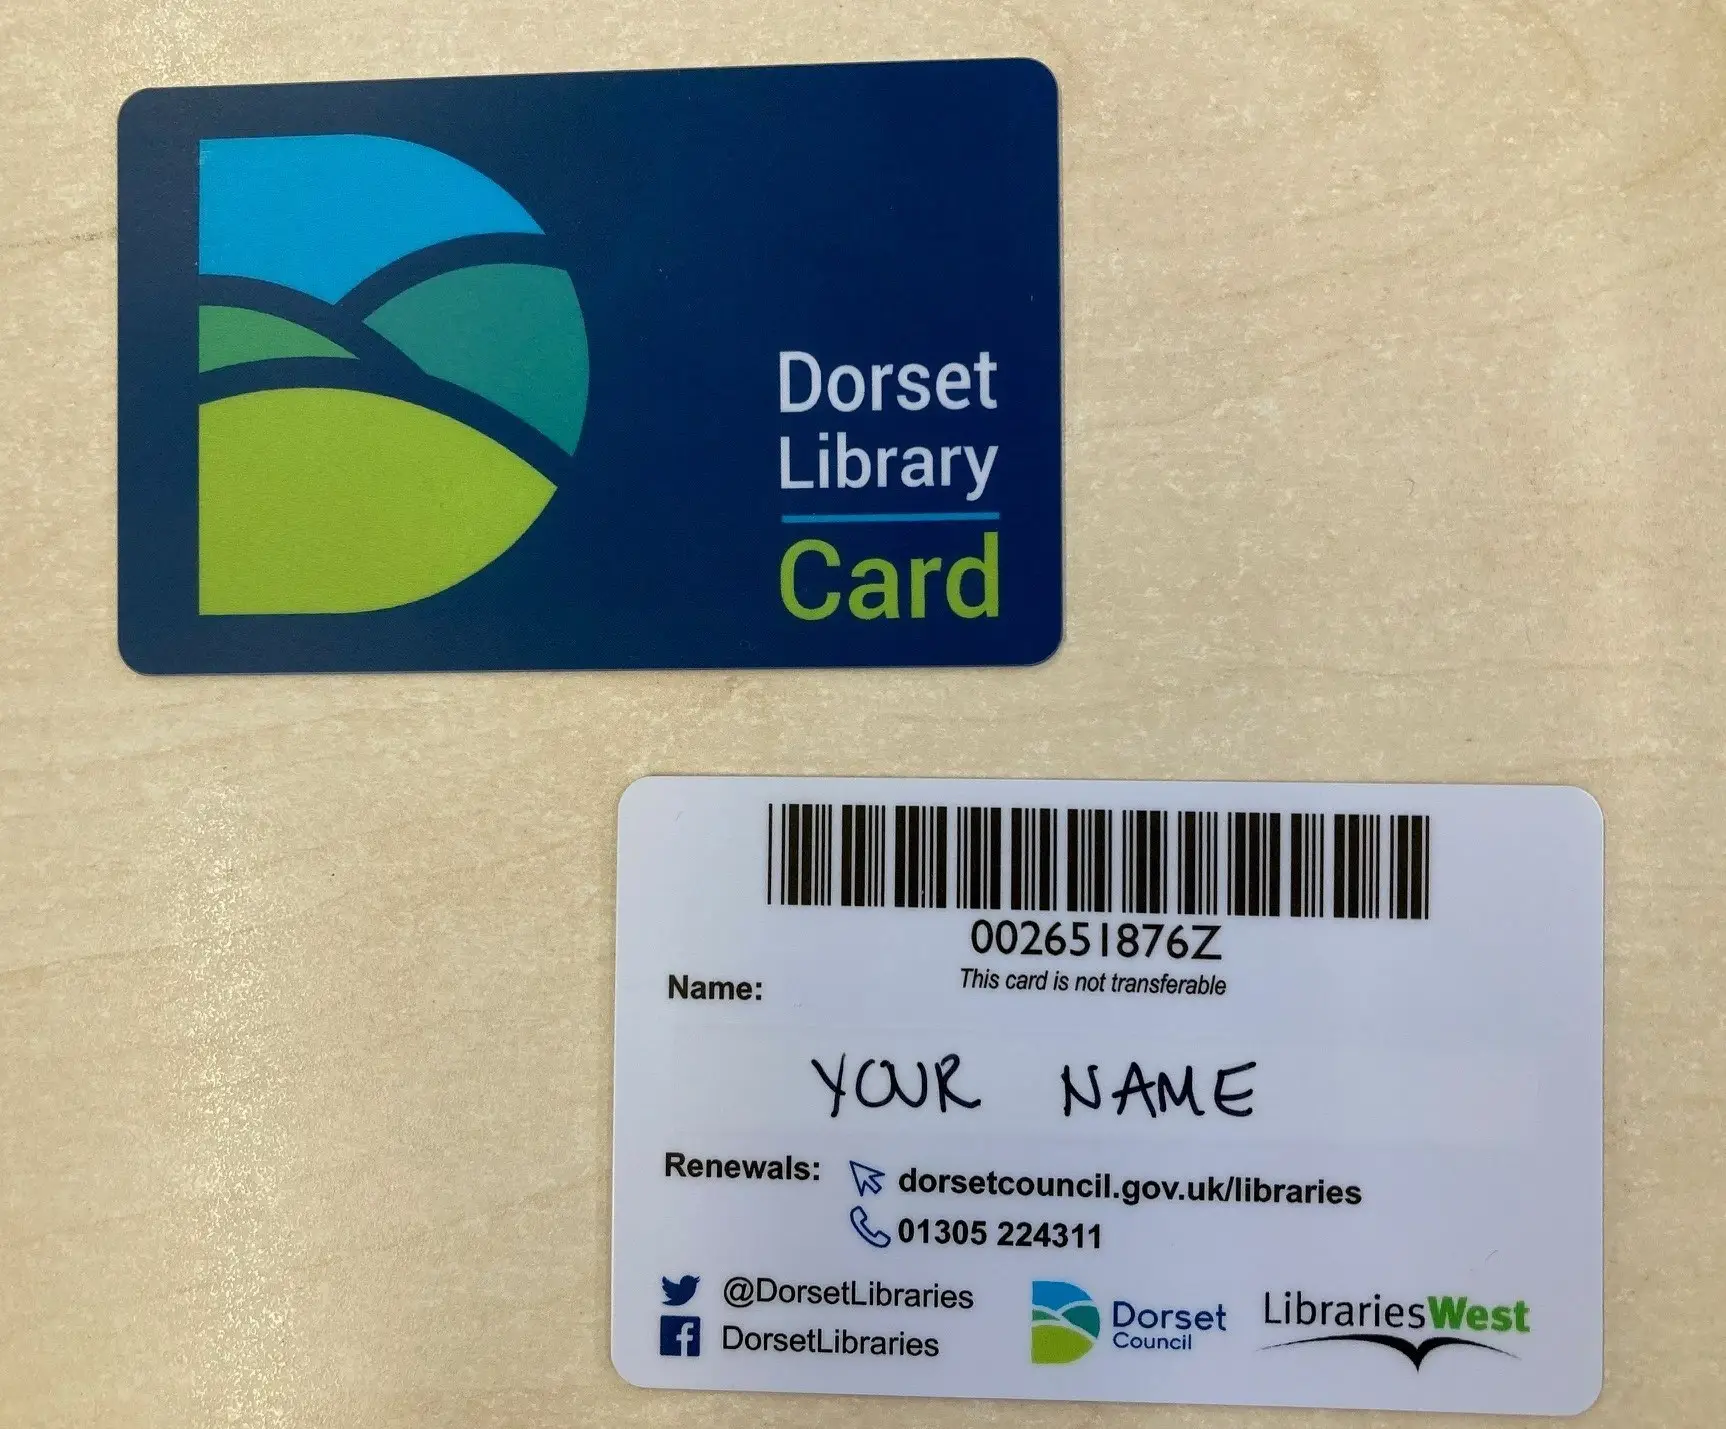 This is a picture of the front and back of a Dorset Library Card.